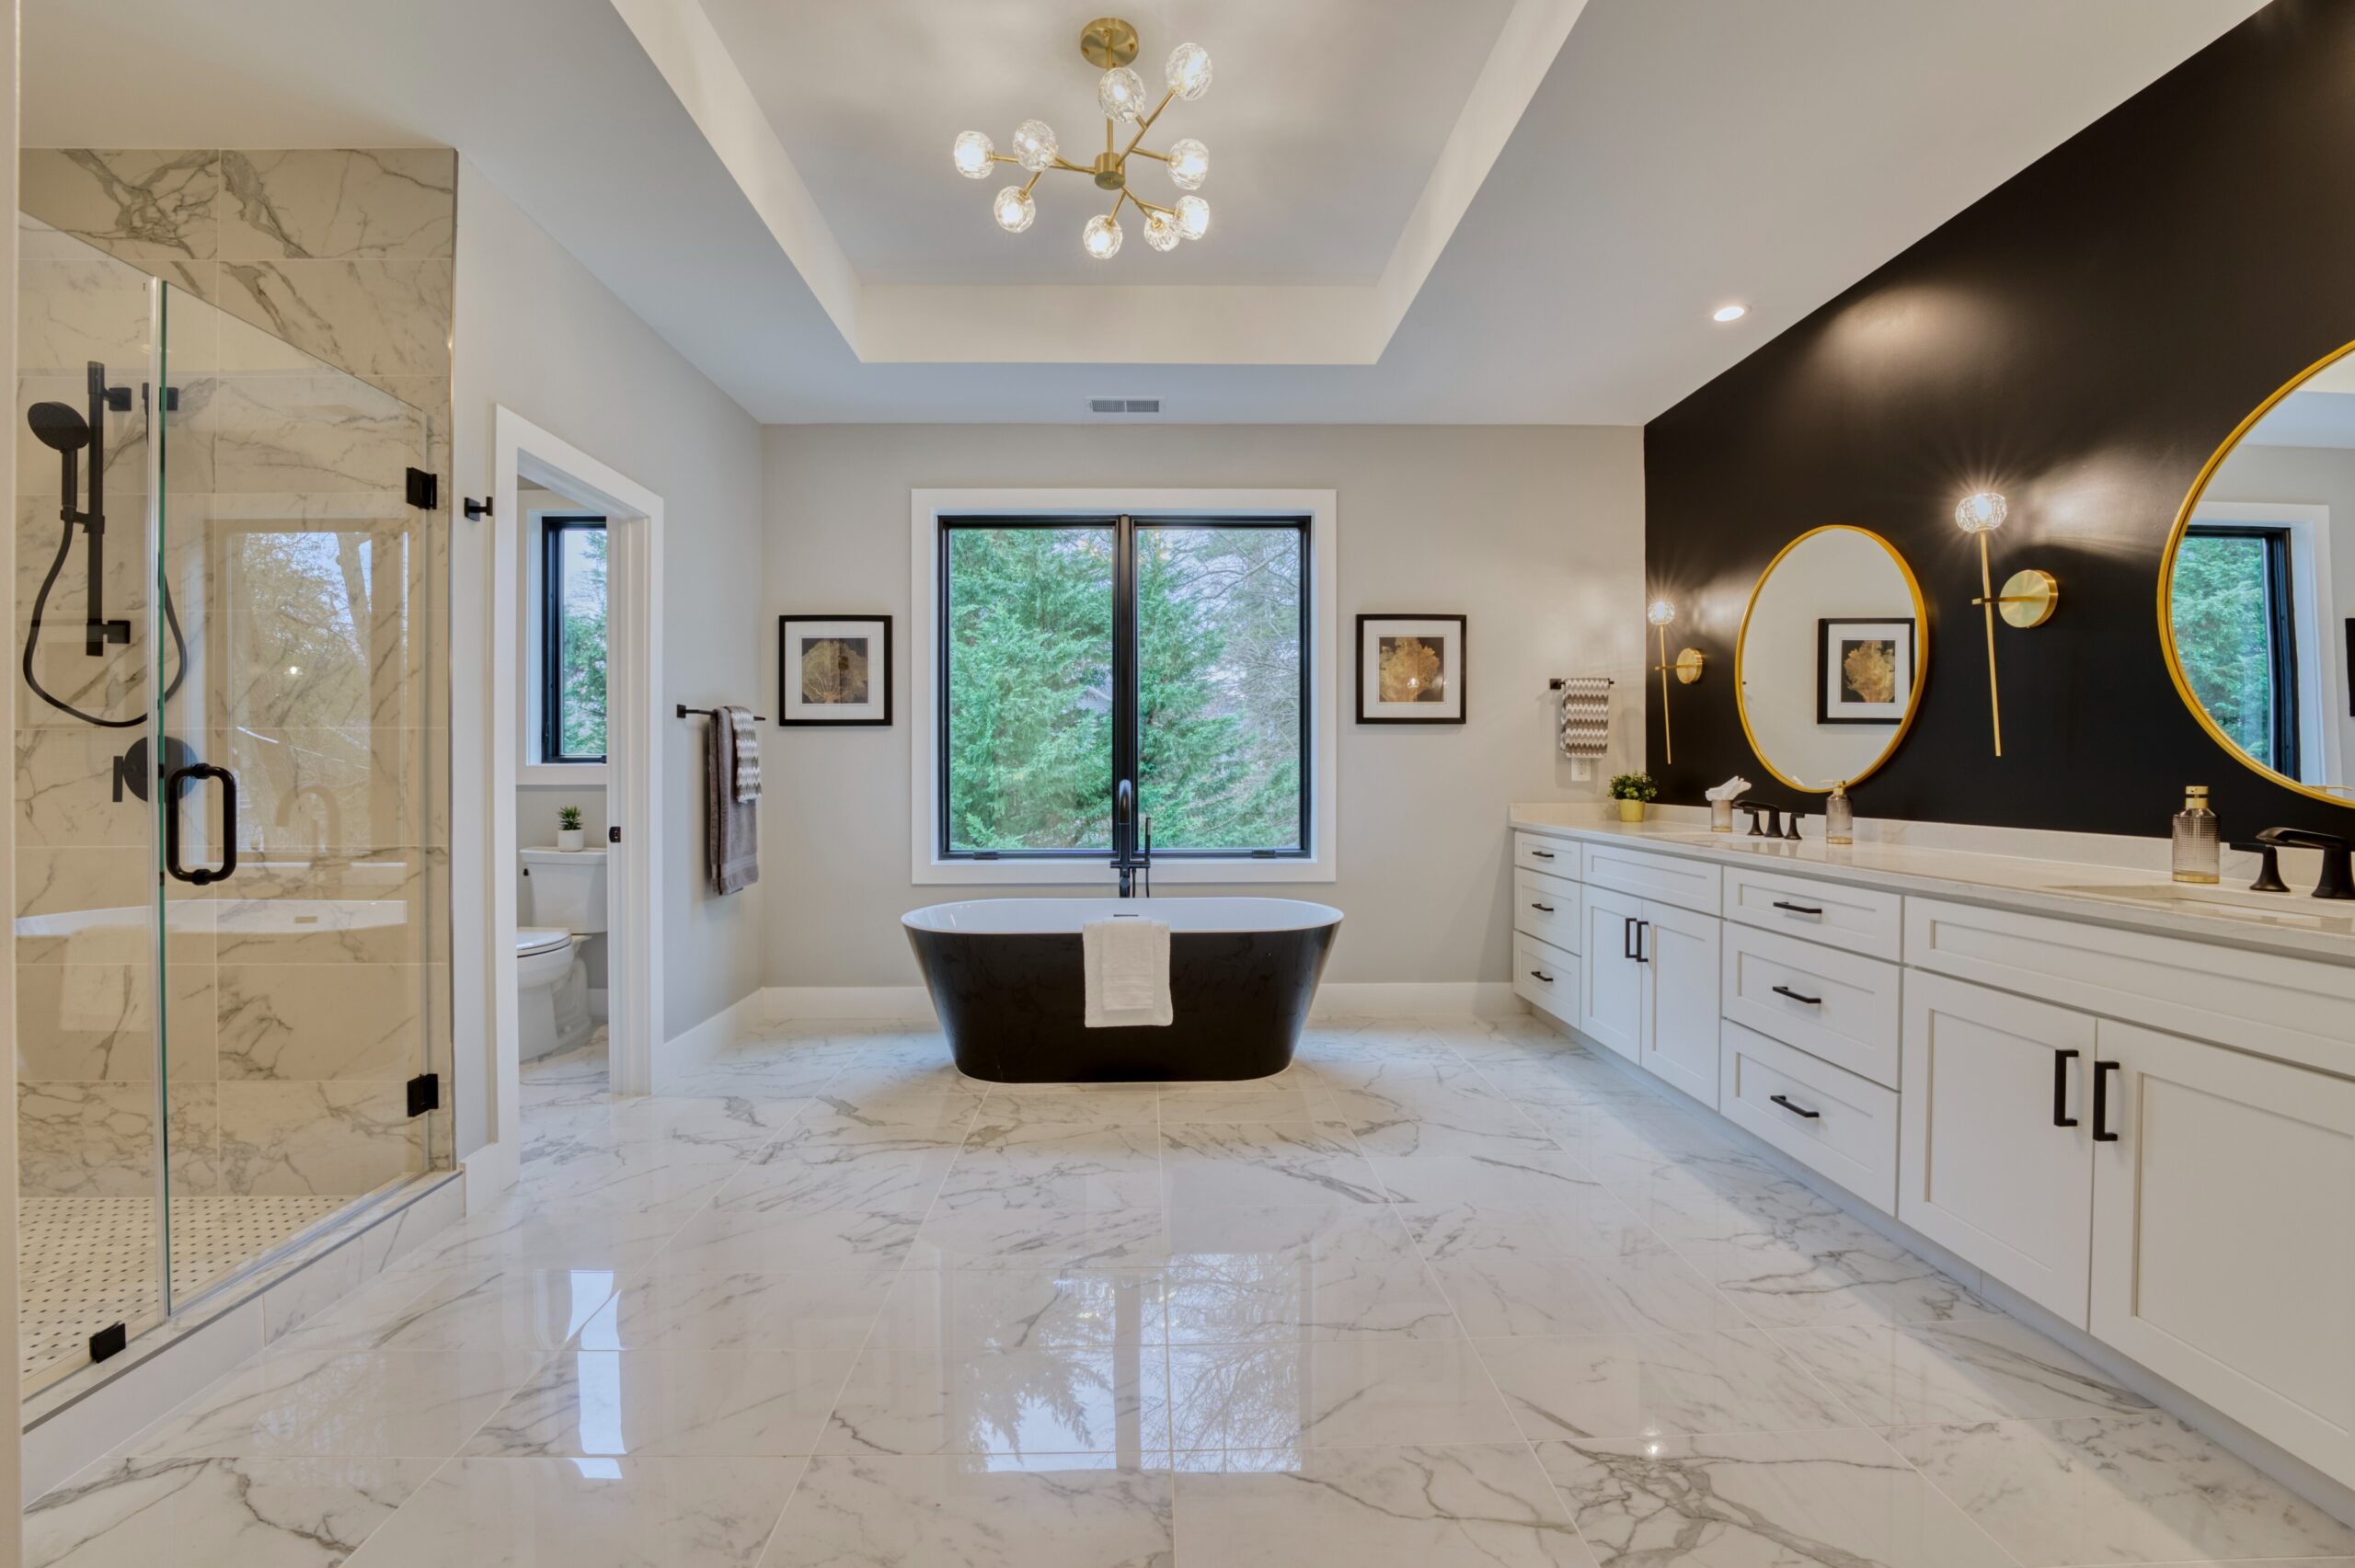 Professional interior photo of new construction home at 3400 N Ohio St - showing the primary bathroom with marble floors, shower, deep soaking tub, tray ceiling and black and gold accents